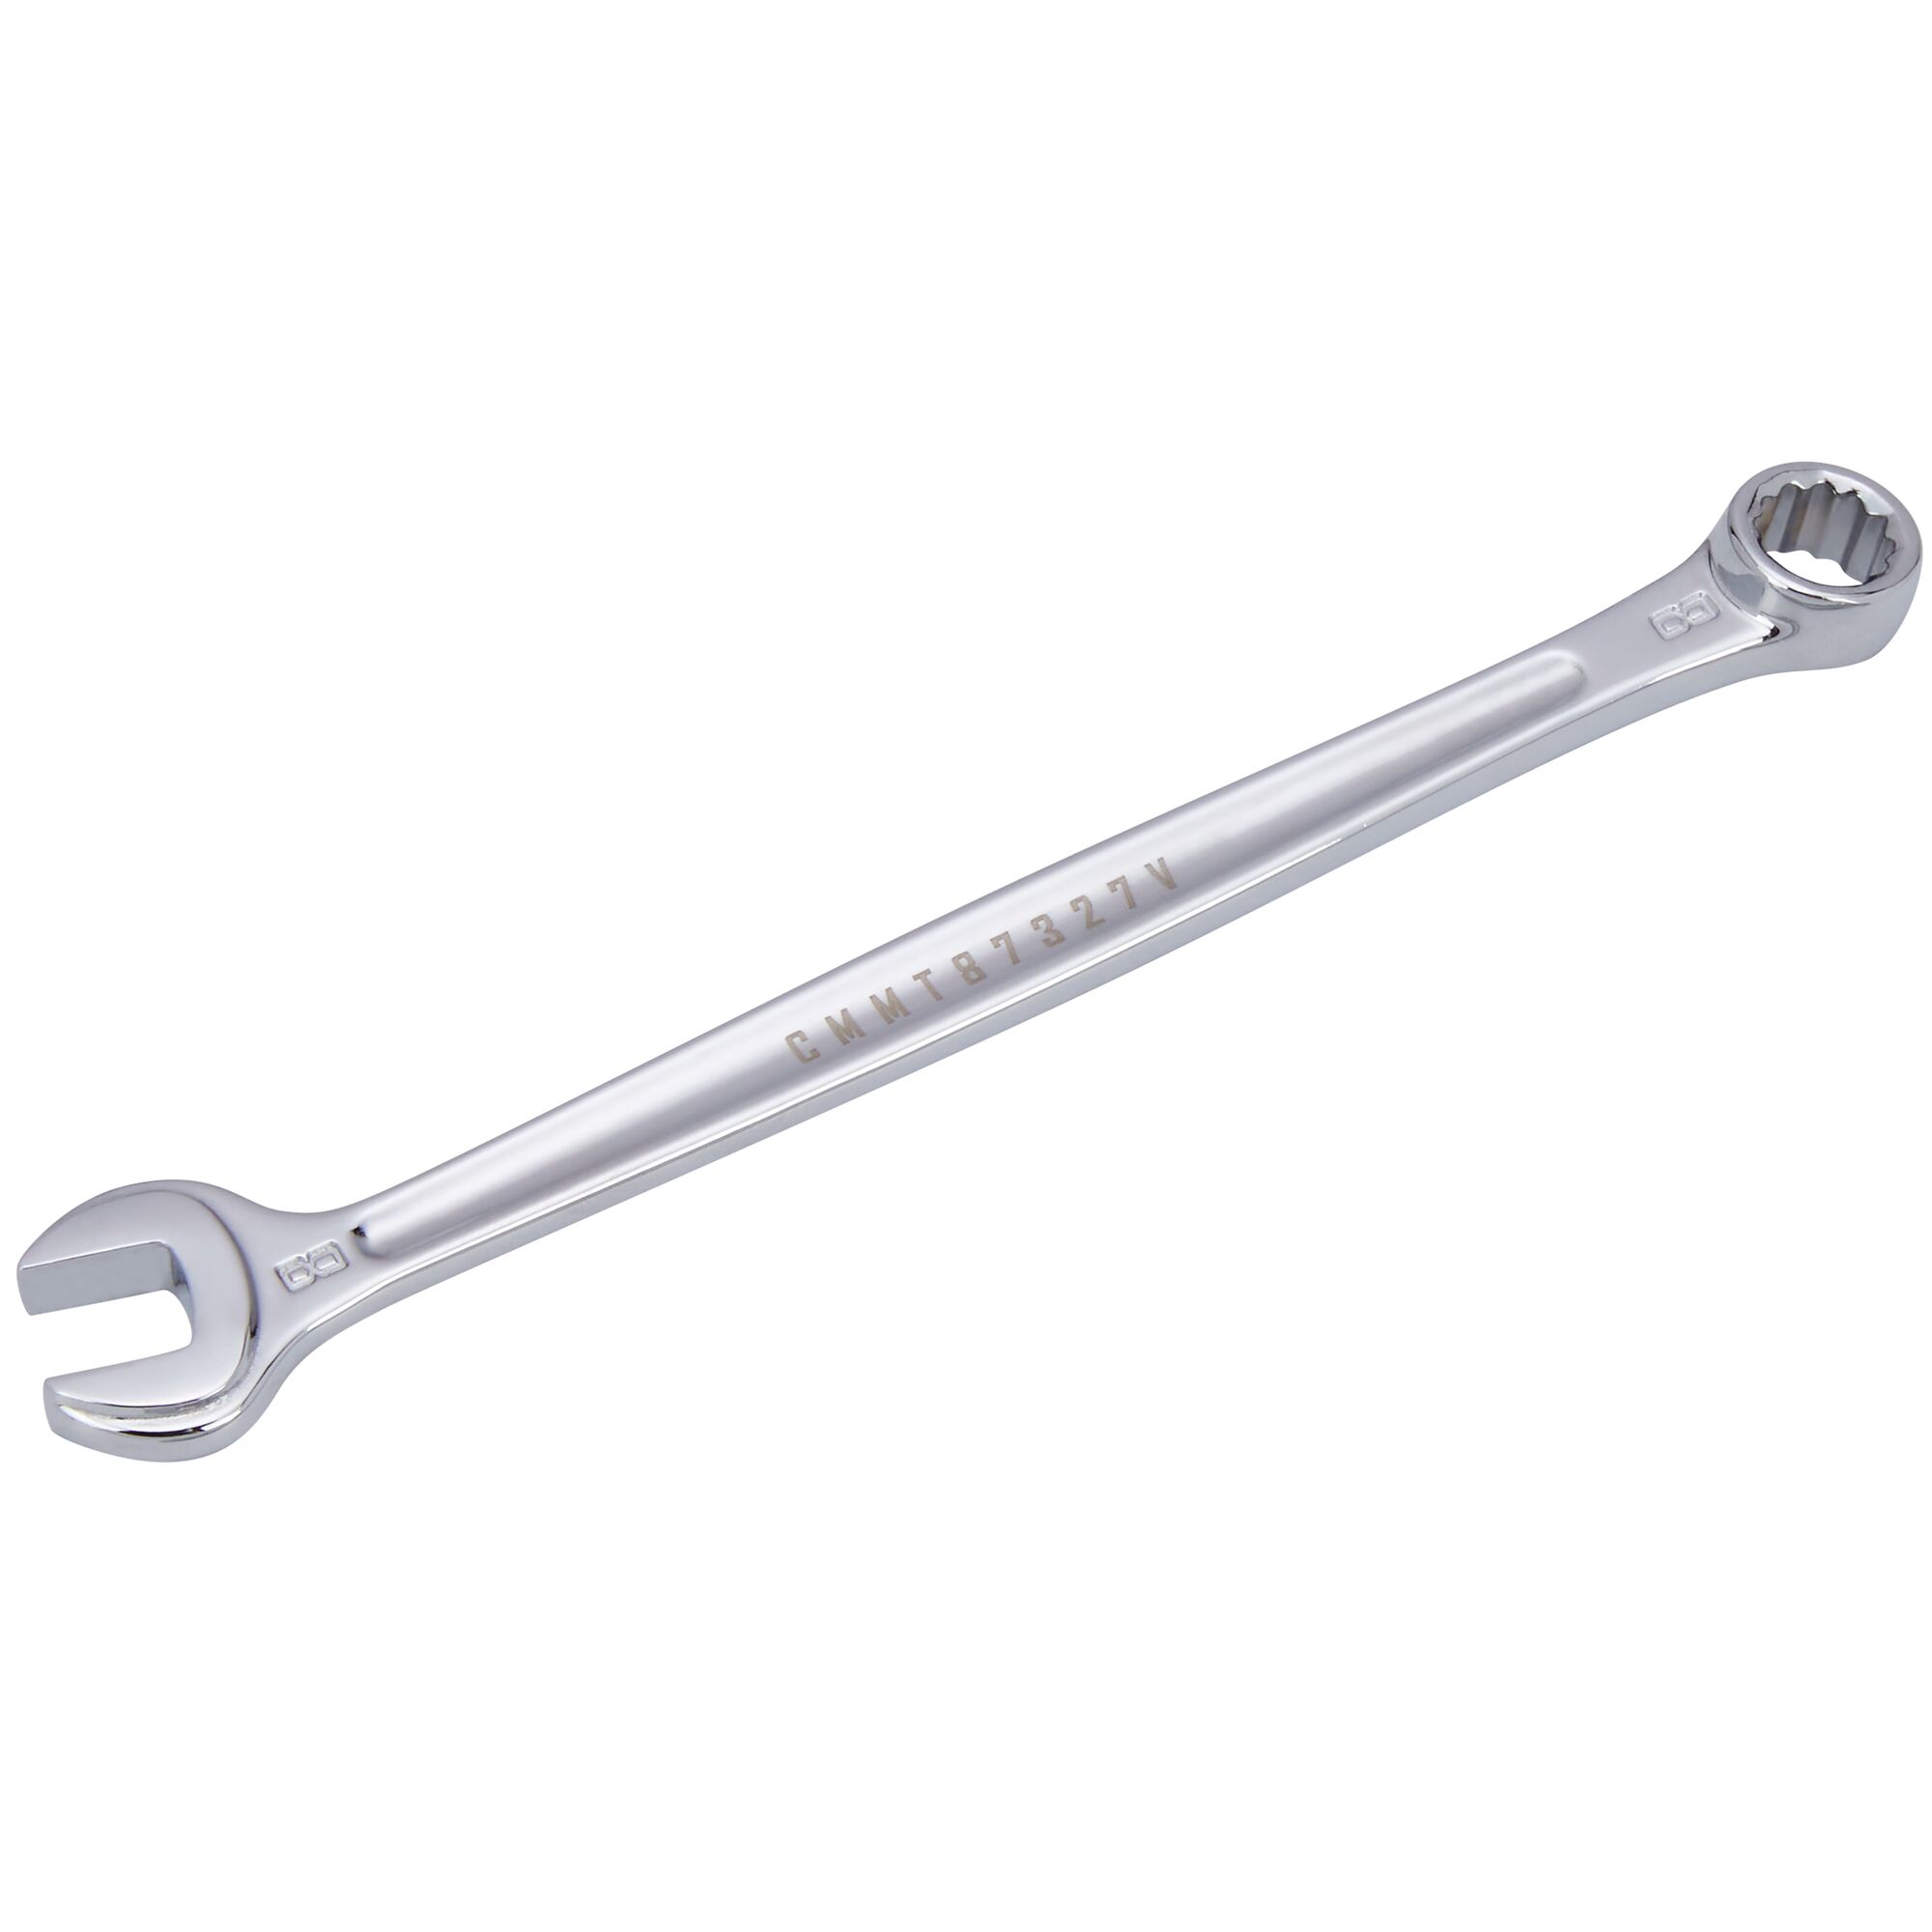 CRAFTSMAN V-SERIES Combo Wrench 08 MM 